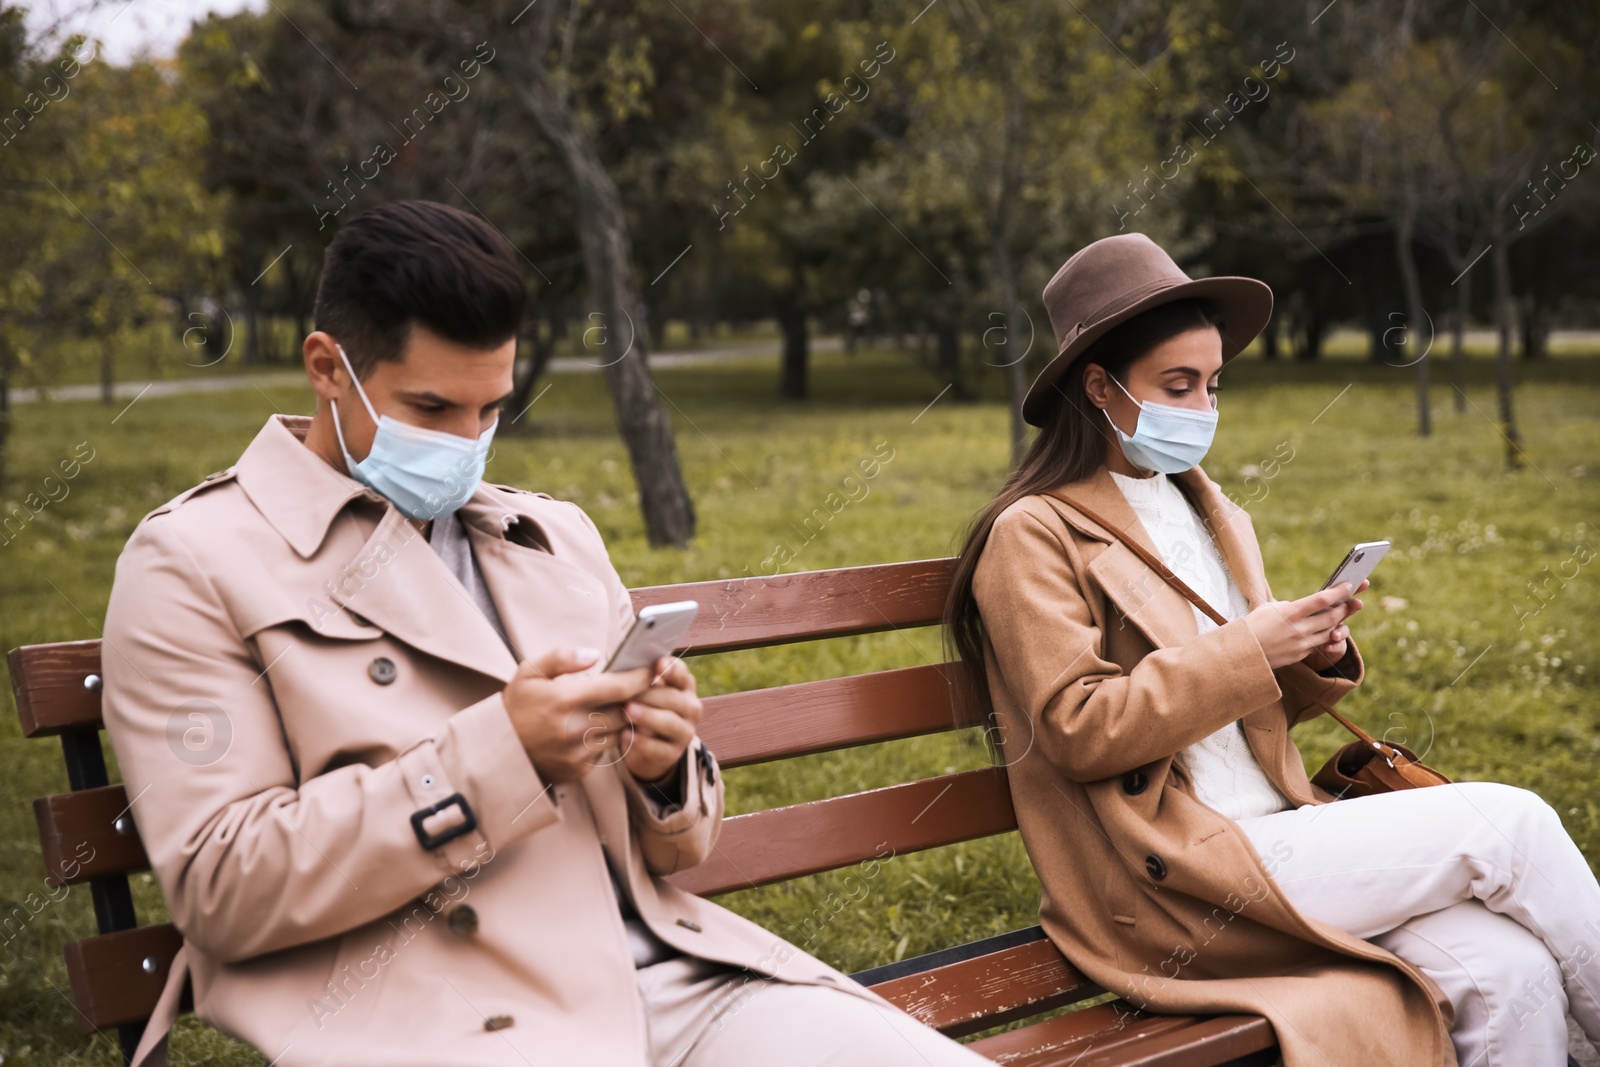 Photo of Man and woman using smartphones in park. Keeping social distance during coronavirus pandemic